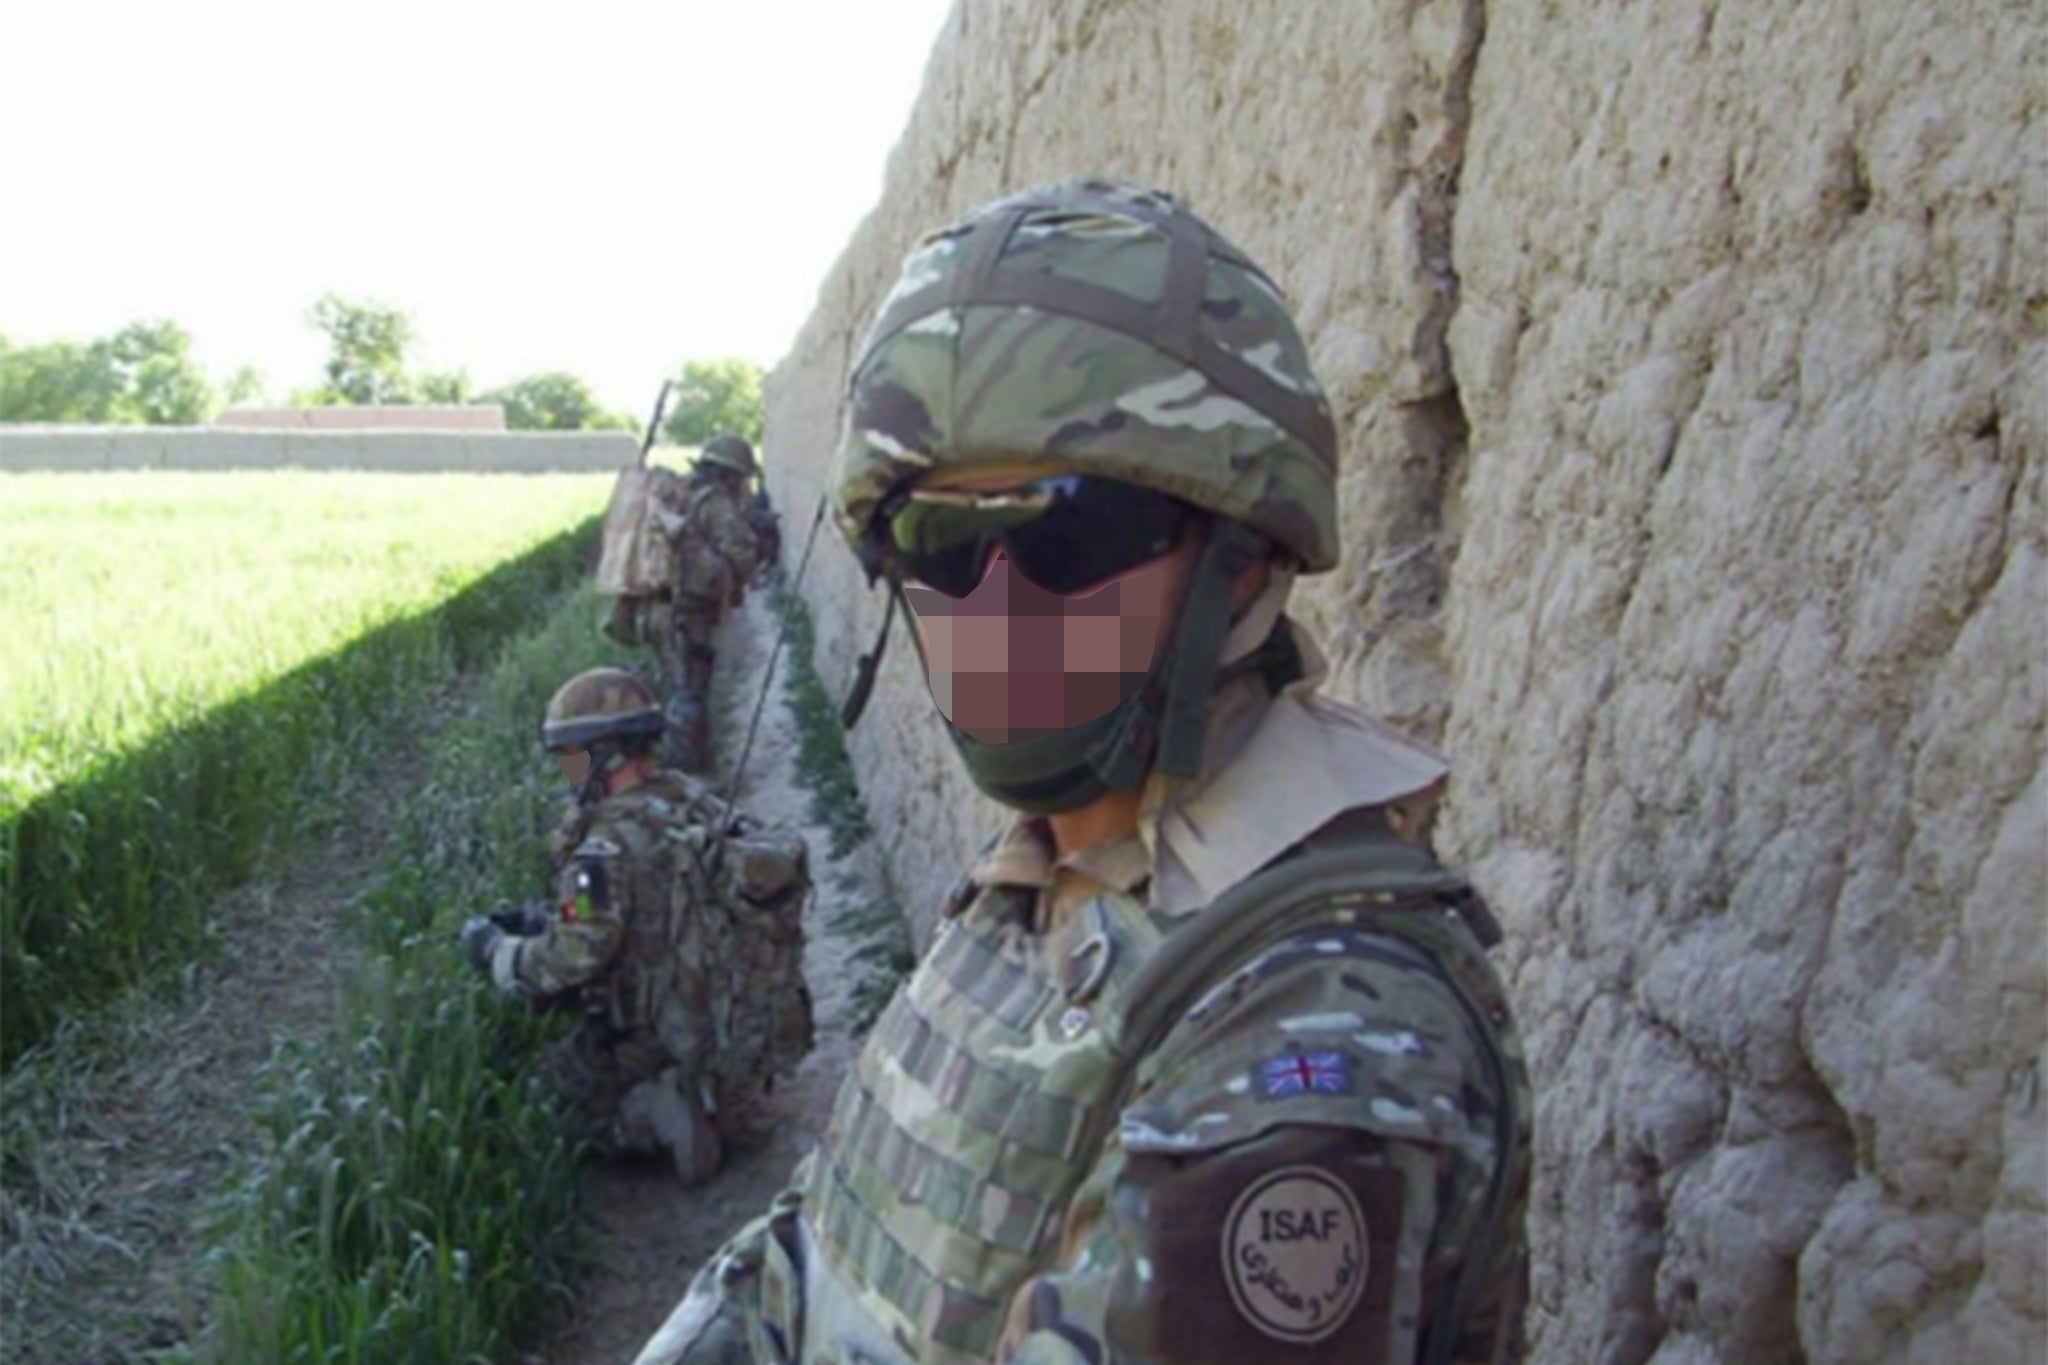 The Afghan interpreter was described as an ‘enthusiastic supporter of the UK mission in Afghanistan’